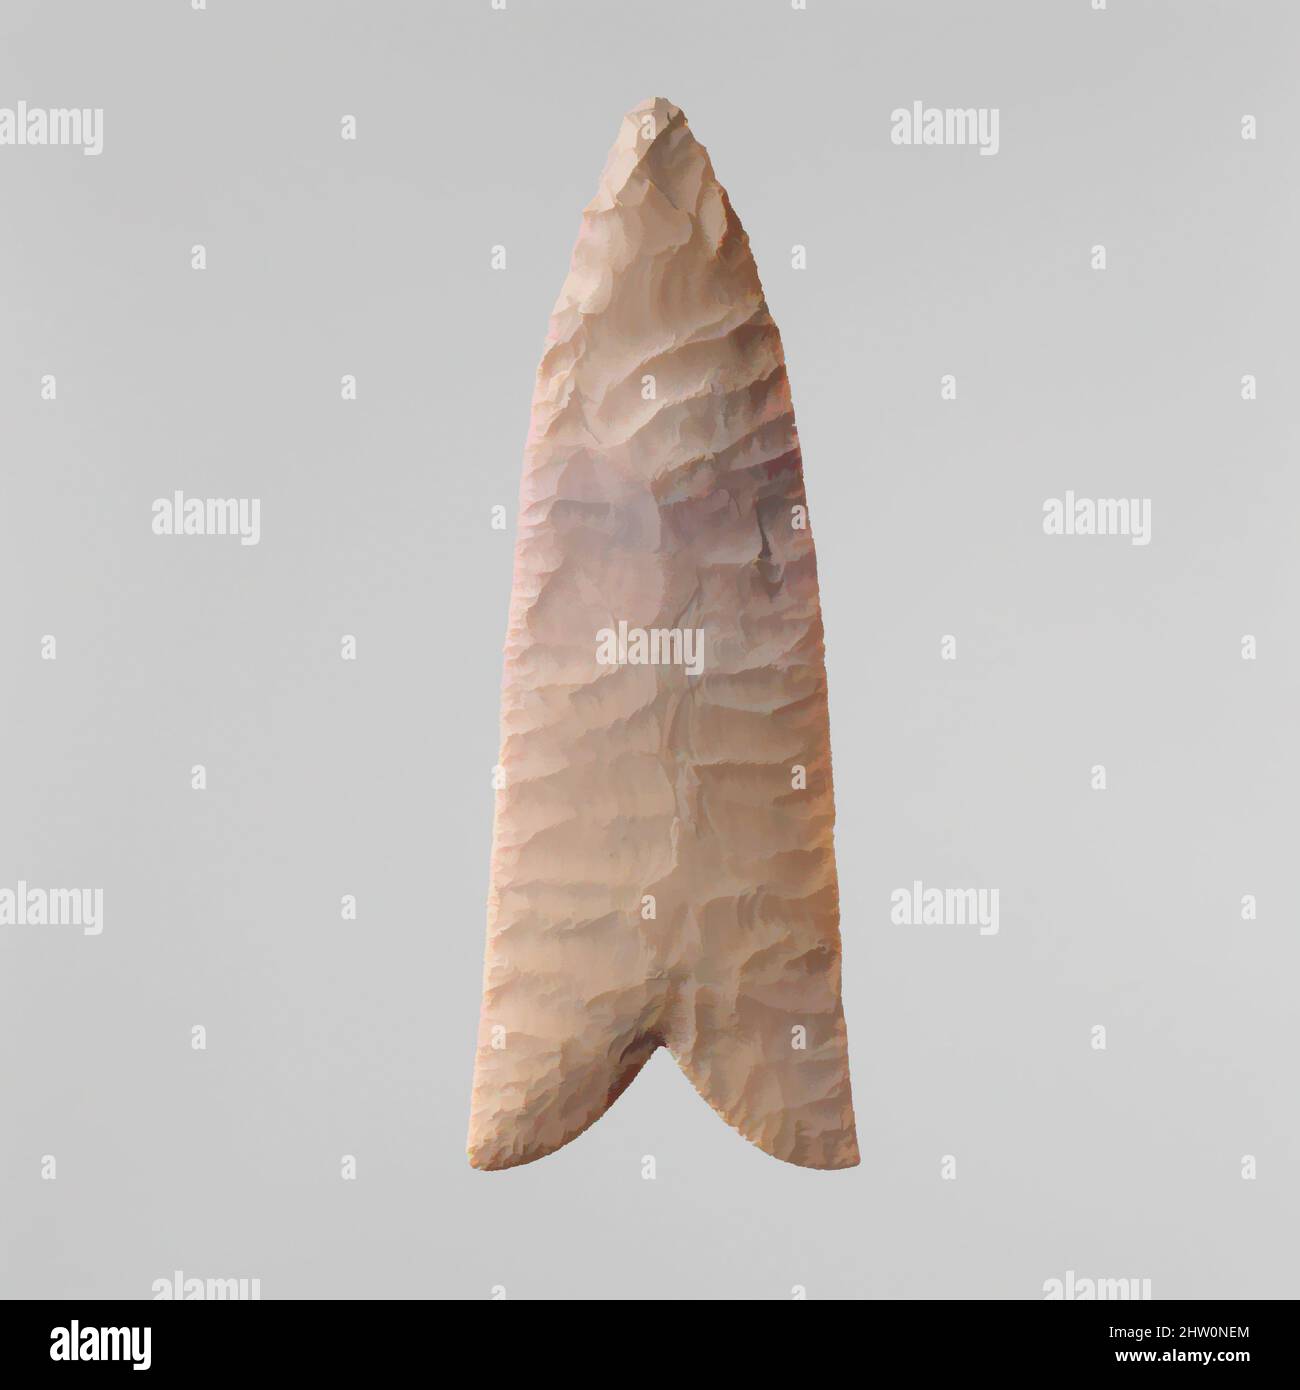 Art inspired by Flint Blade, Predynastic, Naqada II, ca. 3650–3300 B.C., From Egypt, Flint, L. 5.8 x 0.8 x 15.7 cm (2 5/16 x 5/16 x 6 3/16 in.), Blades such as this one were included in burials throughout the Predynastic Period.The cutting edge is the V-shaped notch. Although the, Classic works modernized by Artotop with a splash of modernity. Shapes, color and value, eye-catching visual impact on art. Emotions through freedom of artworks in a contemporary way. A timeless message pursuing a wildly creative new direction. Artists turning to the digital medium and creating the Artotop NFT Stock Photo